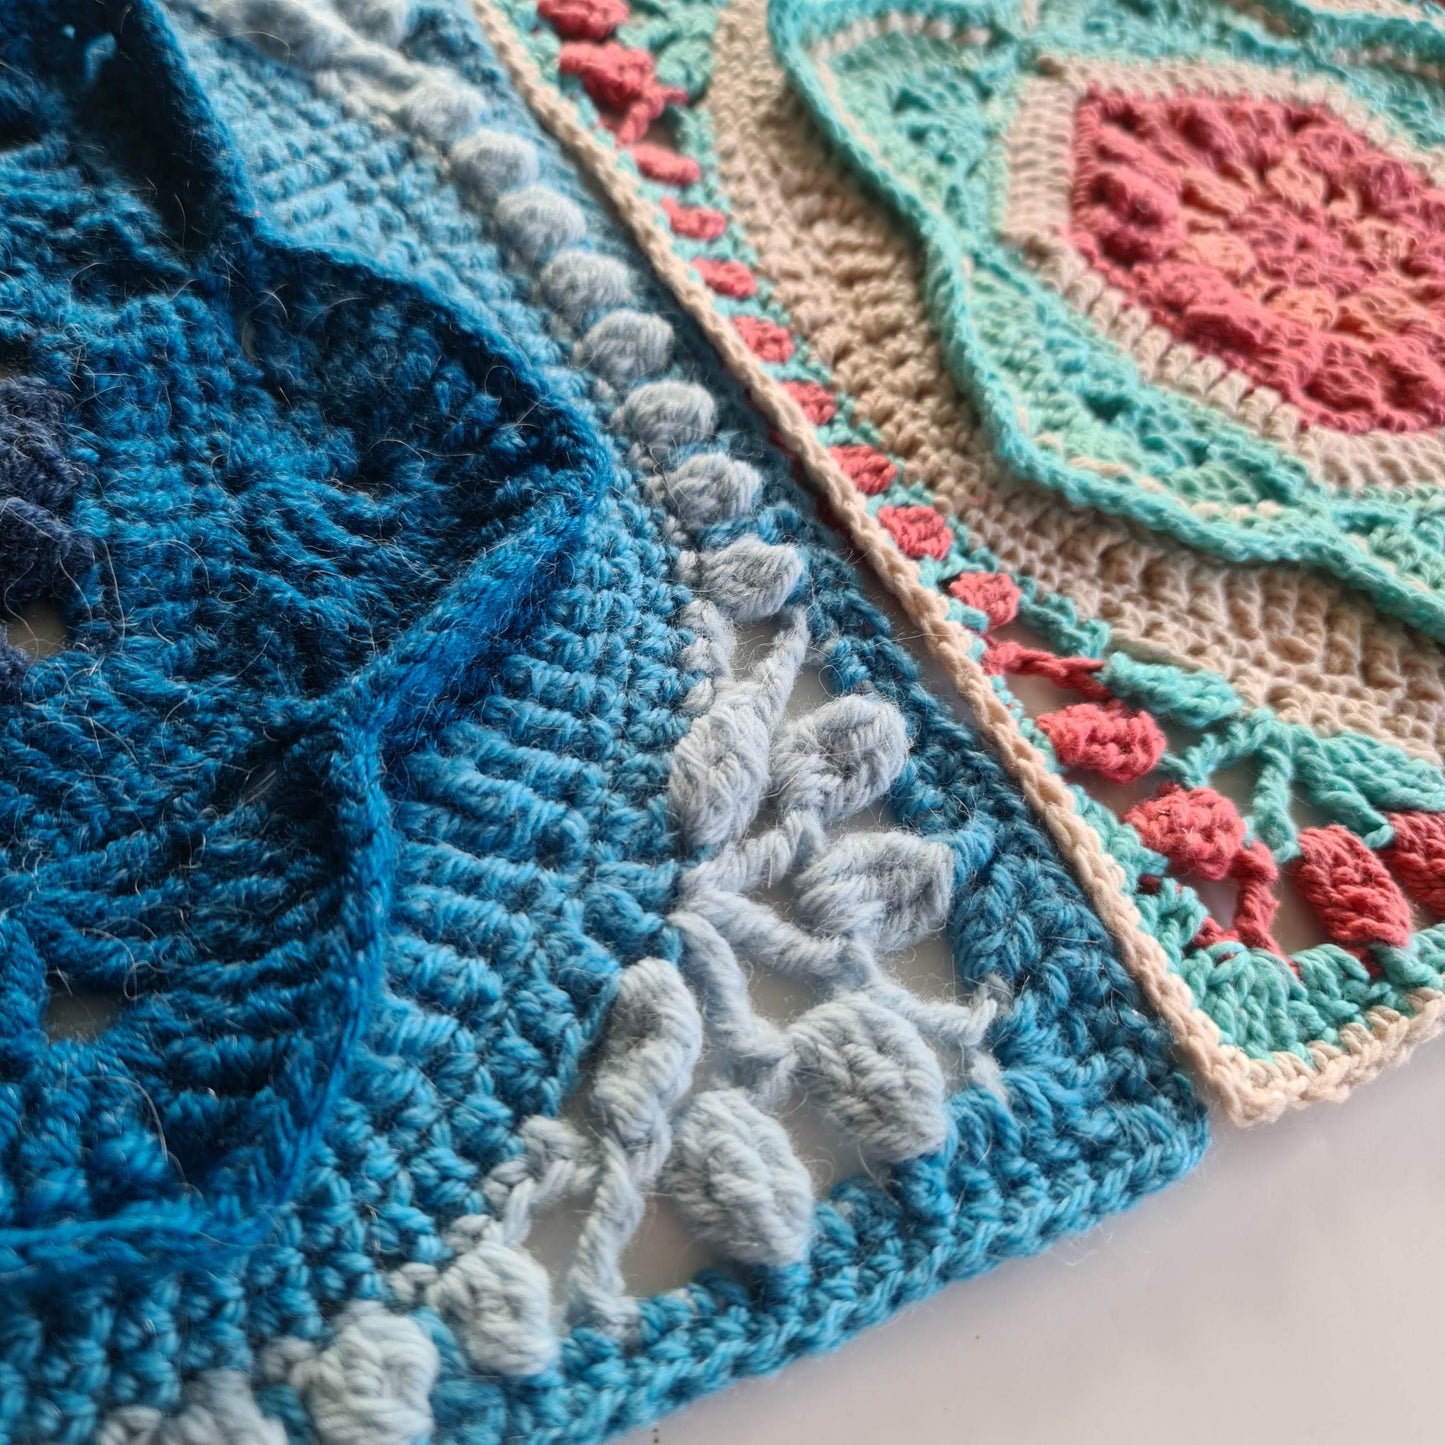 close up view of 2 floral granny squares, one is made with various blues and the other pink, green and cream Asterales Crochet Granny Square Pattern by Shelley Husband